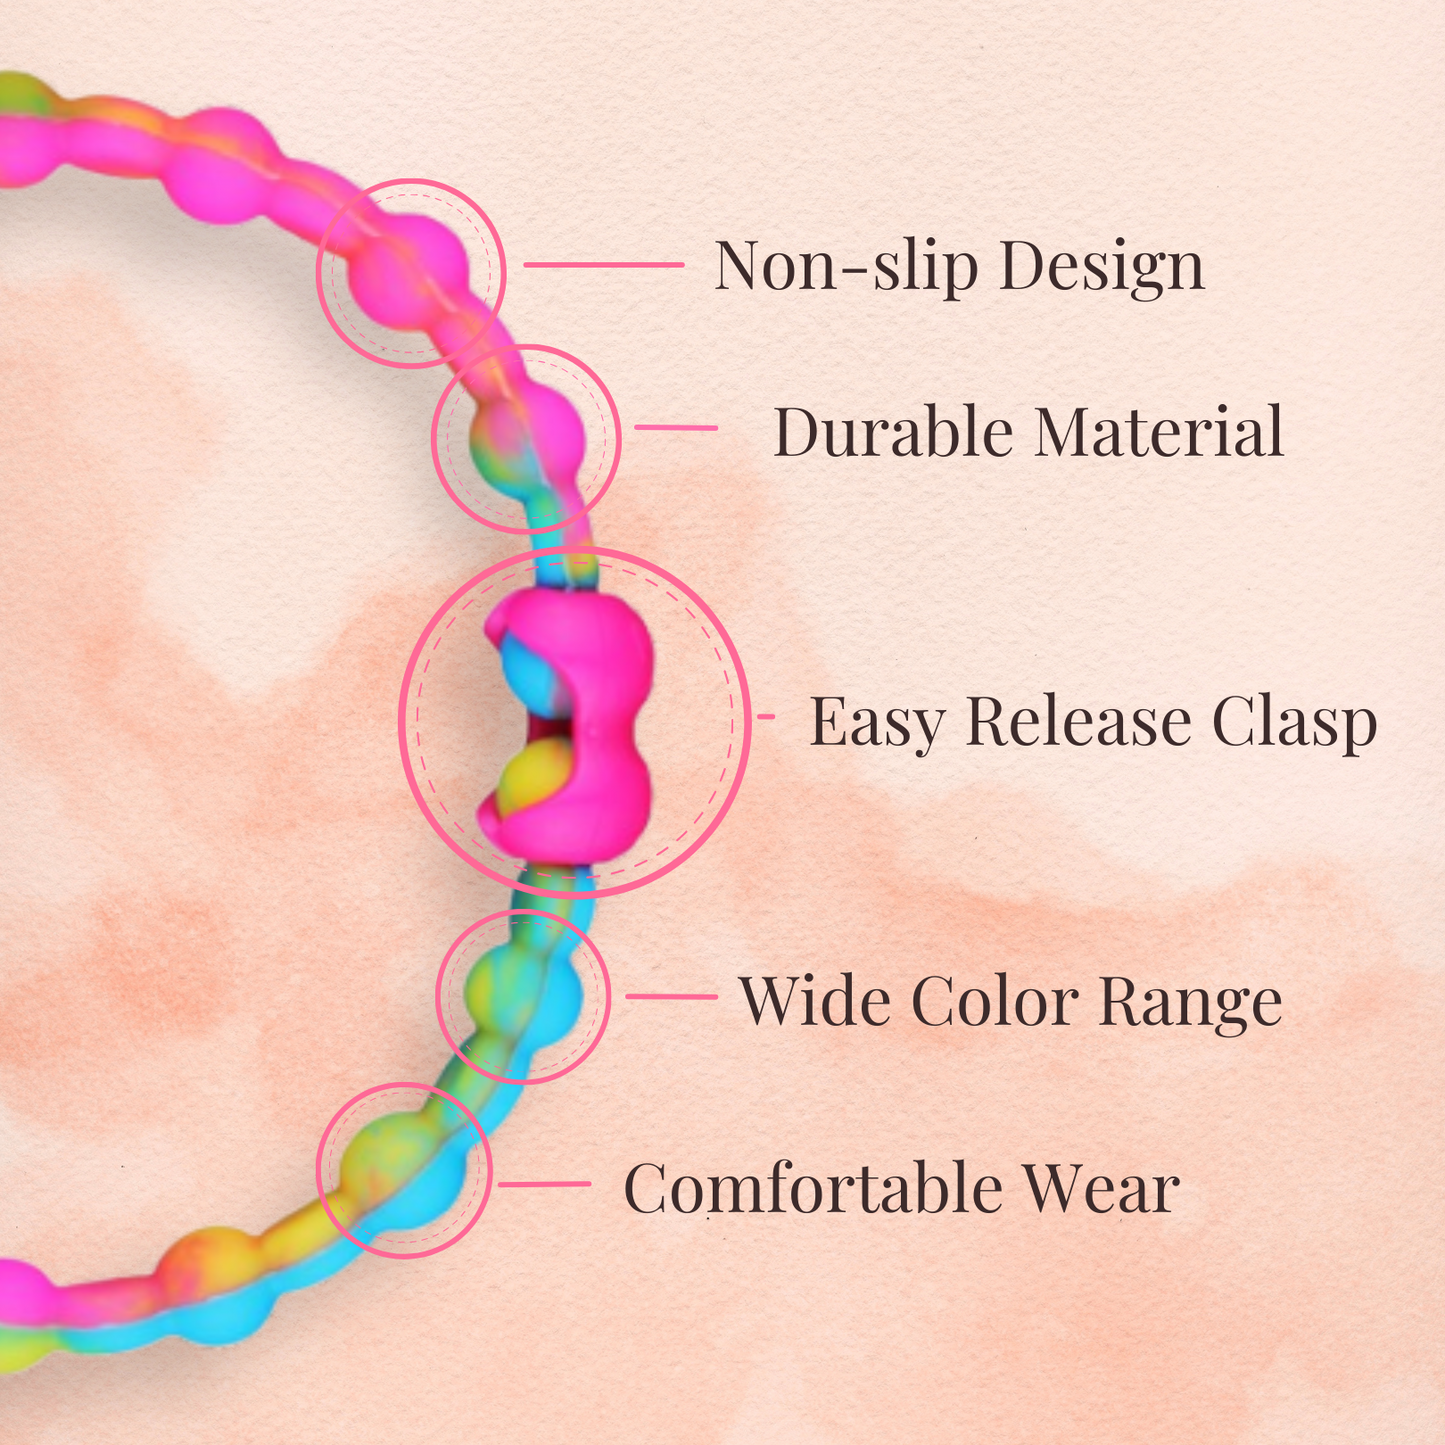 Golden Hour Pack PRO Hair Ties (4-Pack): Capture the Radiance of Sunset